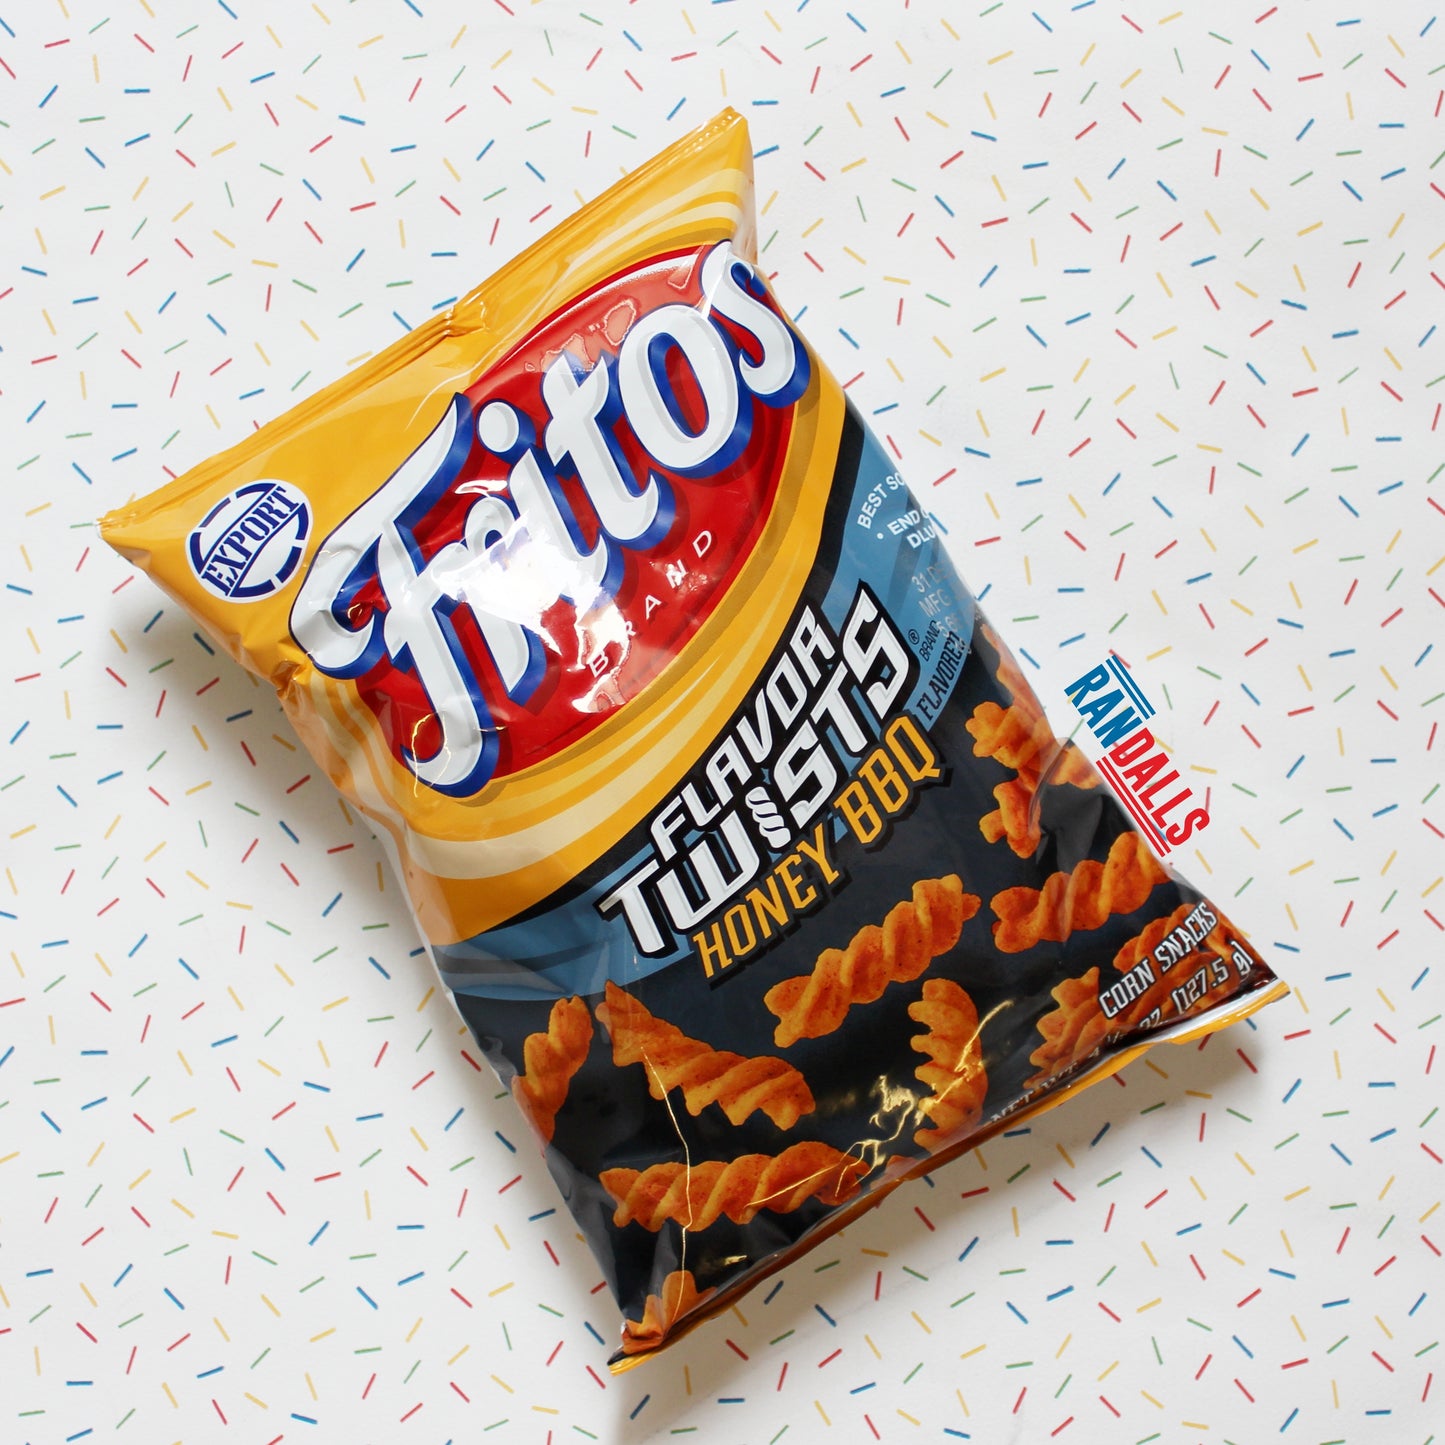 fritos flavour twists honey bbq, barbecue, barbeque, corn chips, crisps, randalls, usa